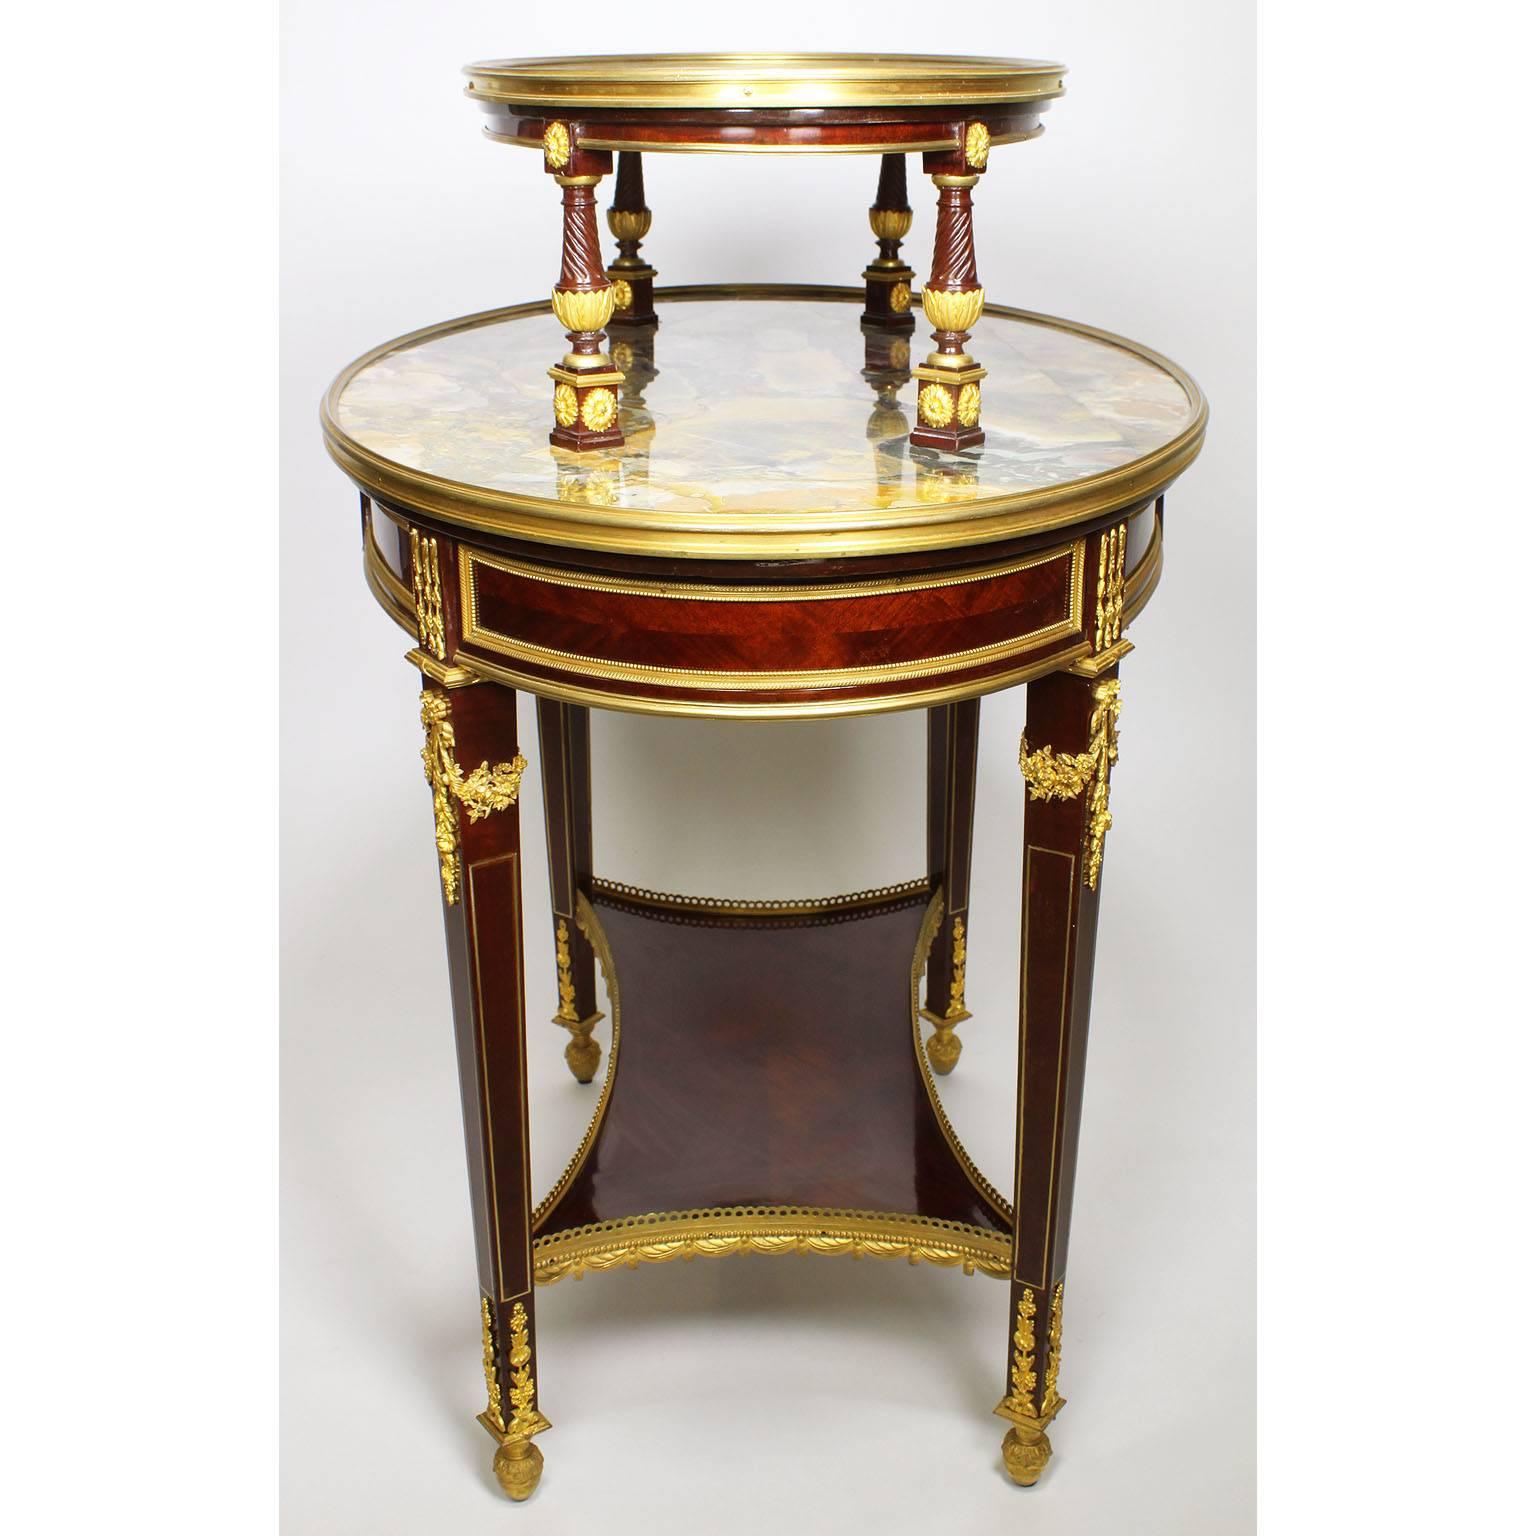 French 19th Century Louis XVI Style Ormolu-Mounted Mahogany Two-Tier Tea-Table For Sale 2